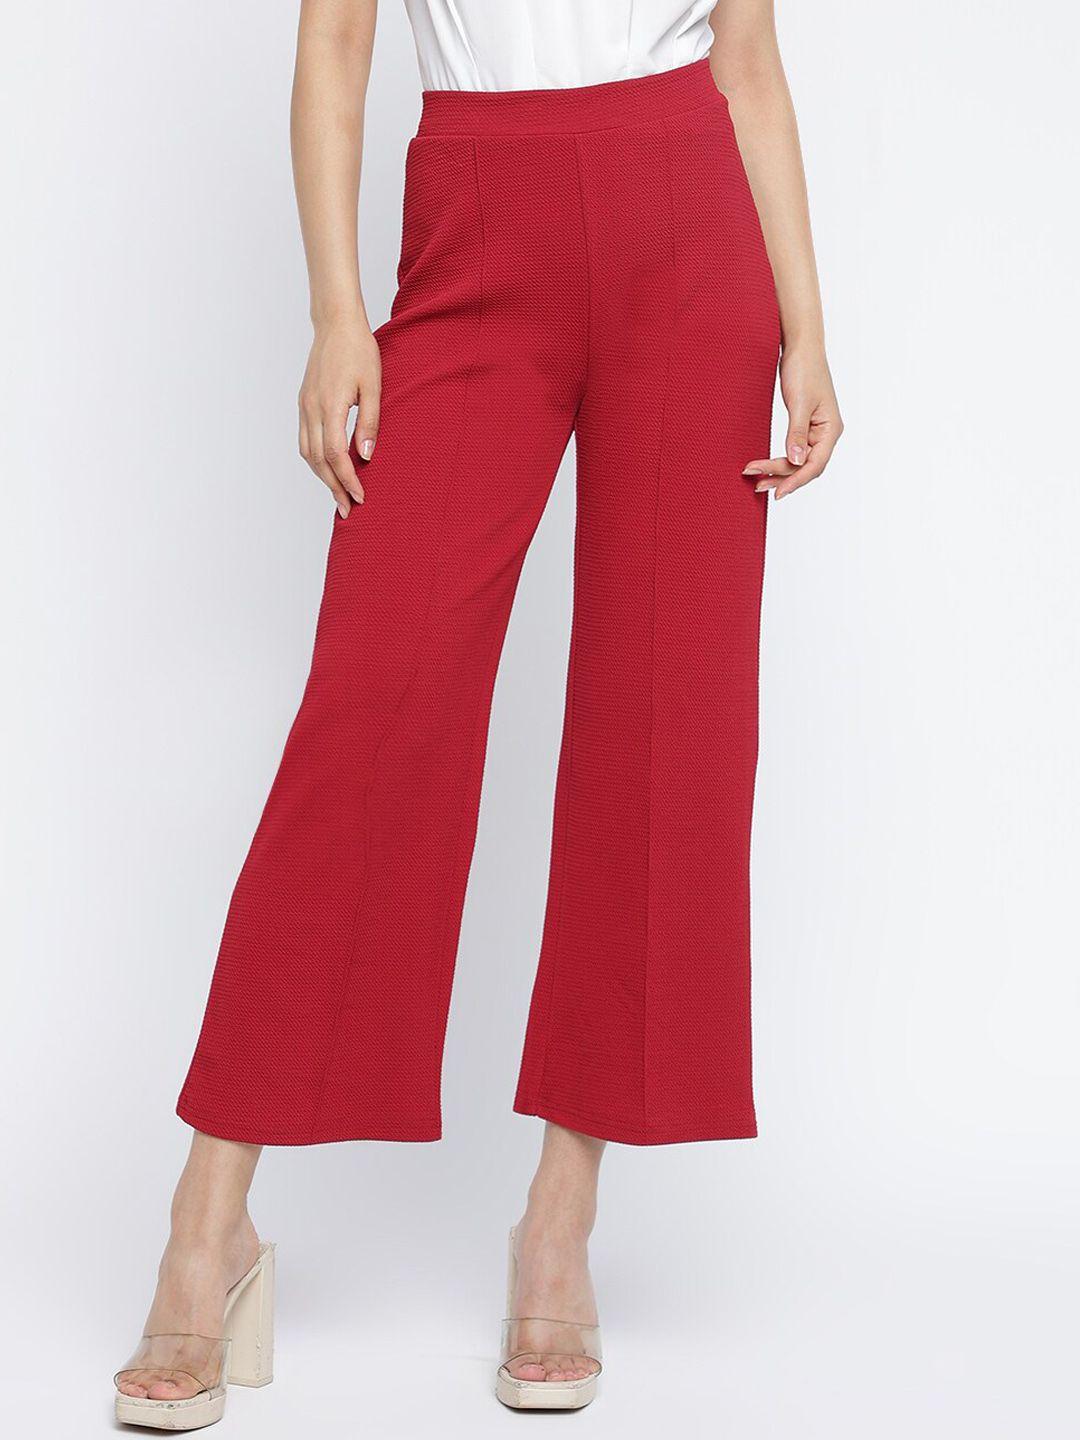 mayra women relaxed high-rise parallel trousers